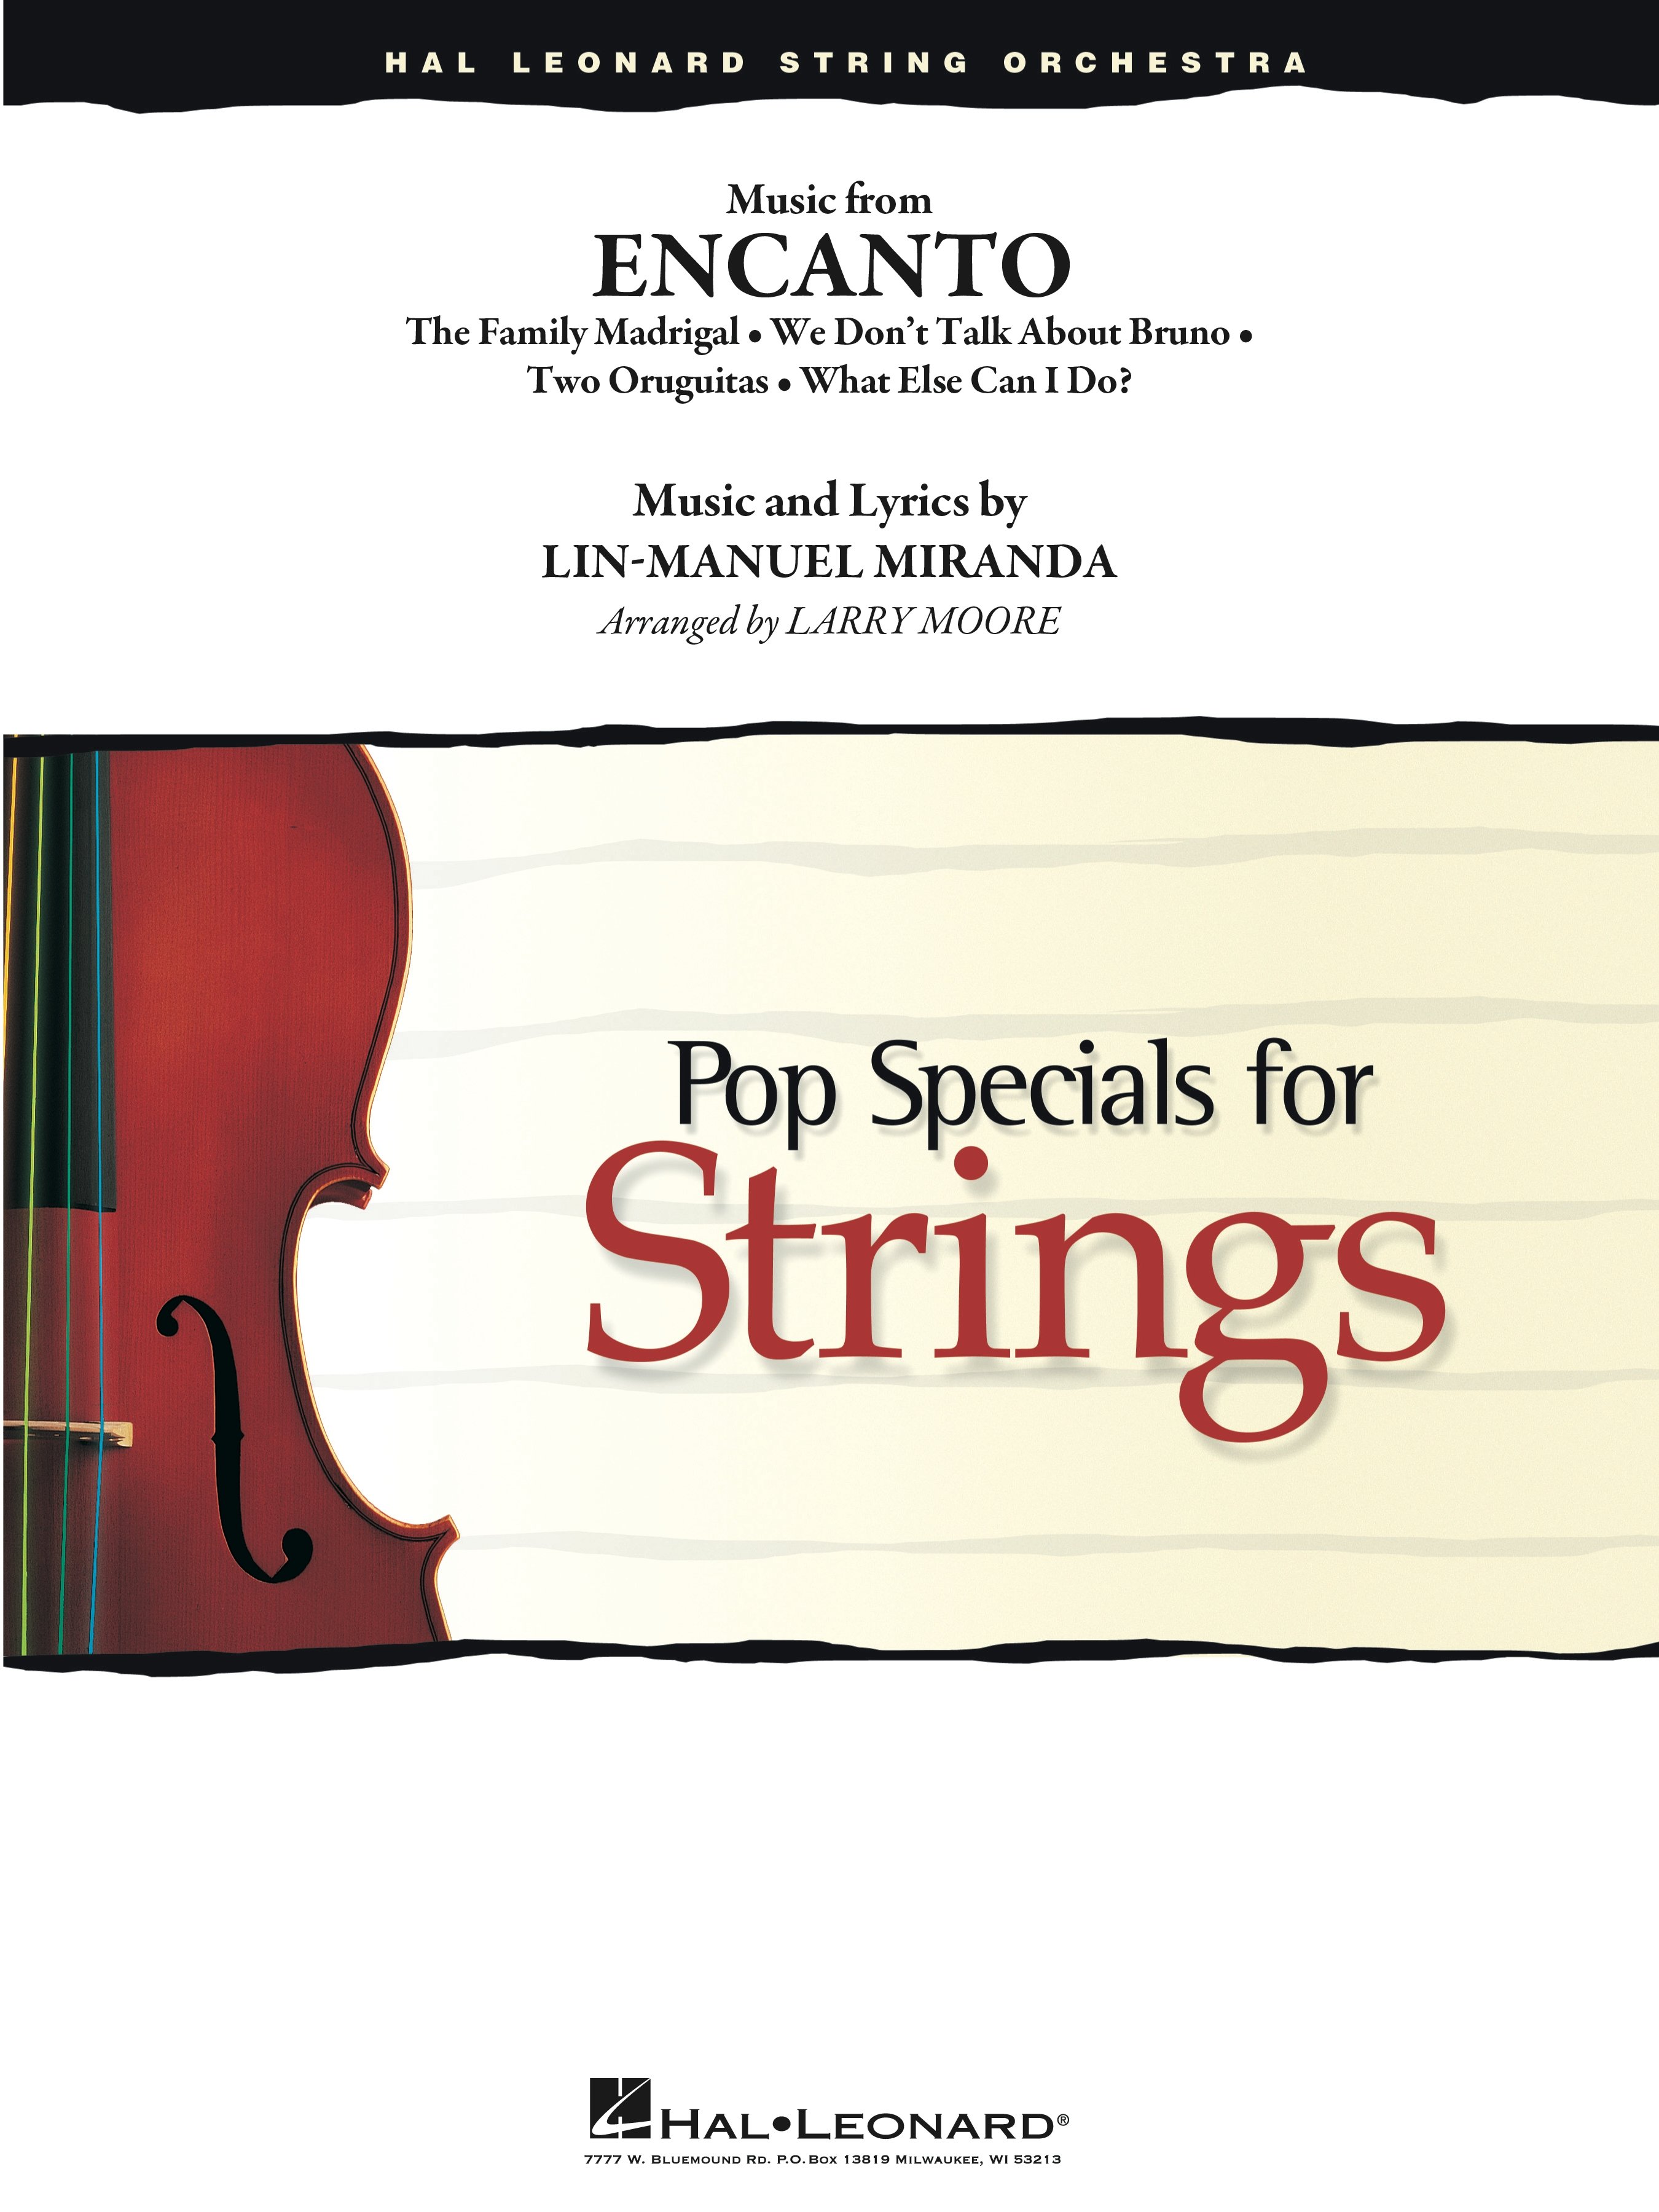 Music from Encanto orchestra sheet music cover